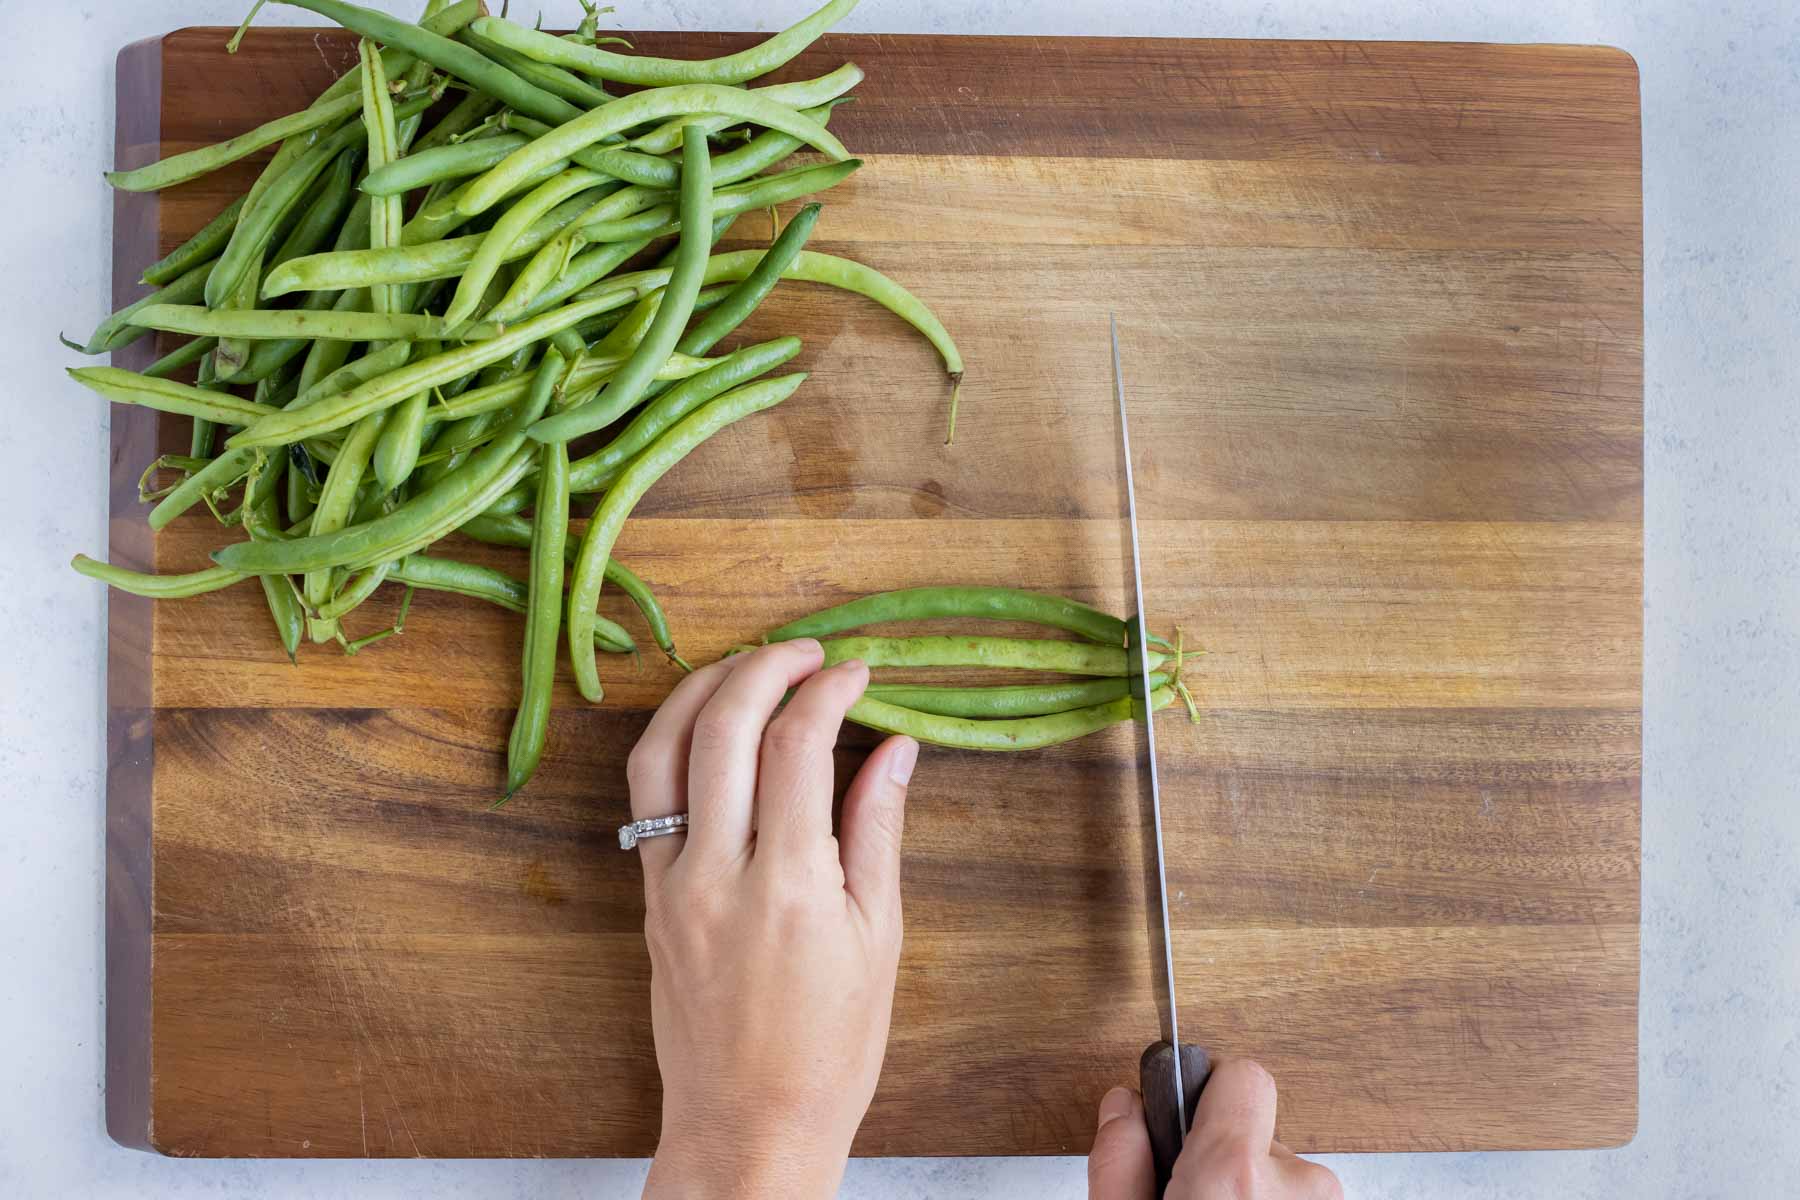 Multiple green beans are prepared to be boiled.